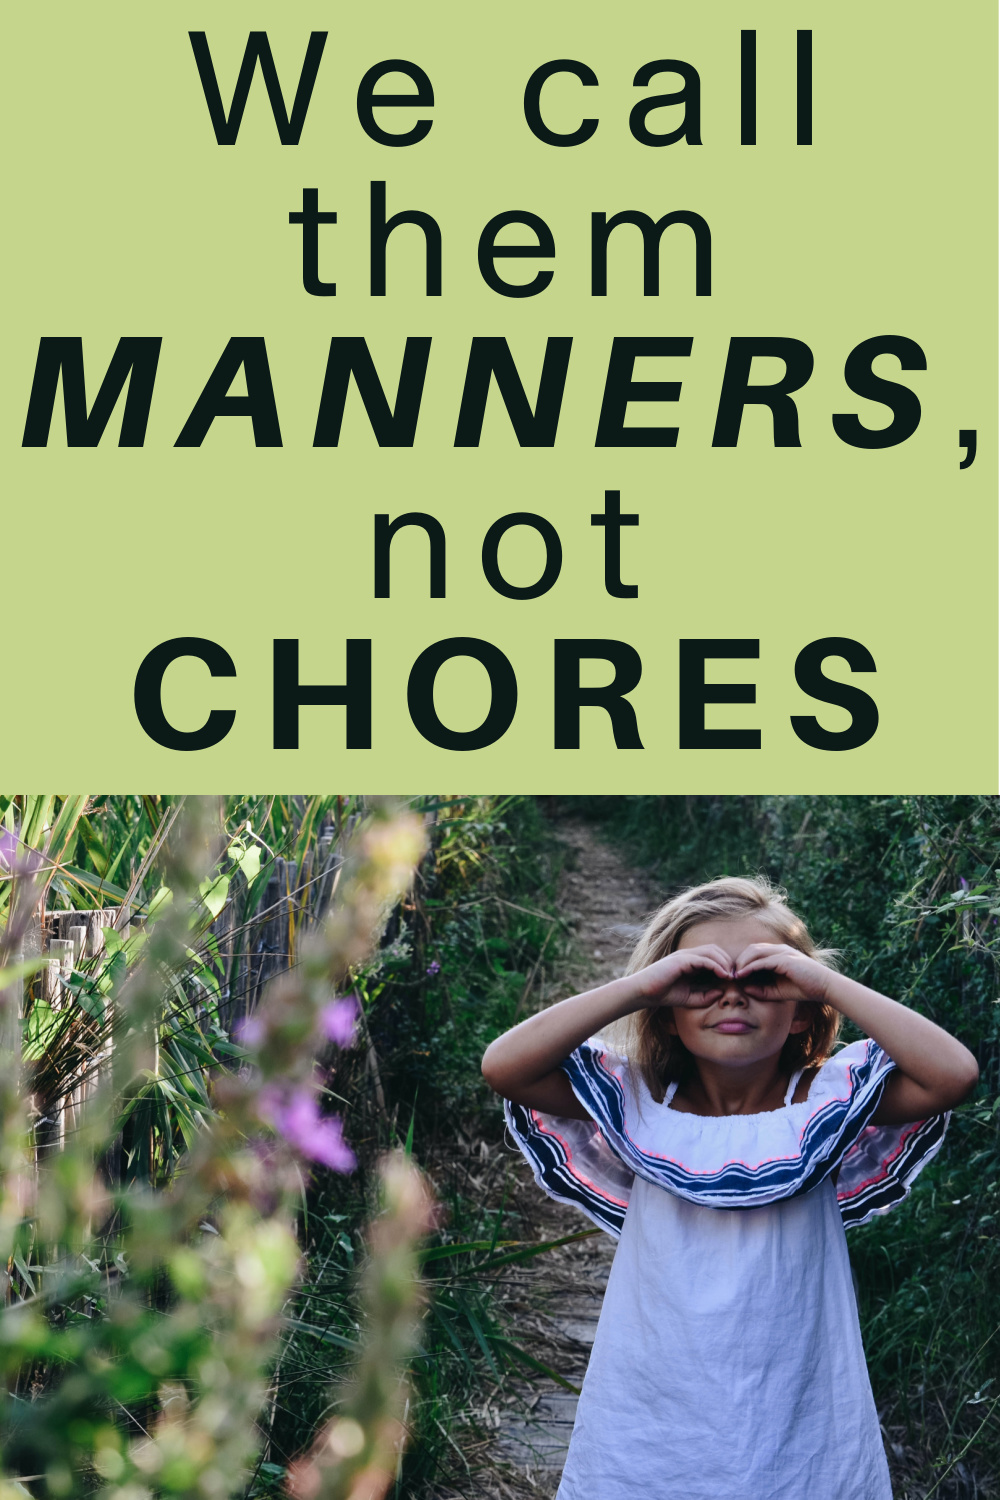 manners, not chores